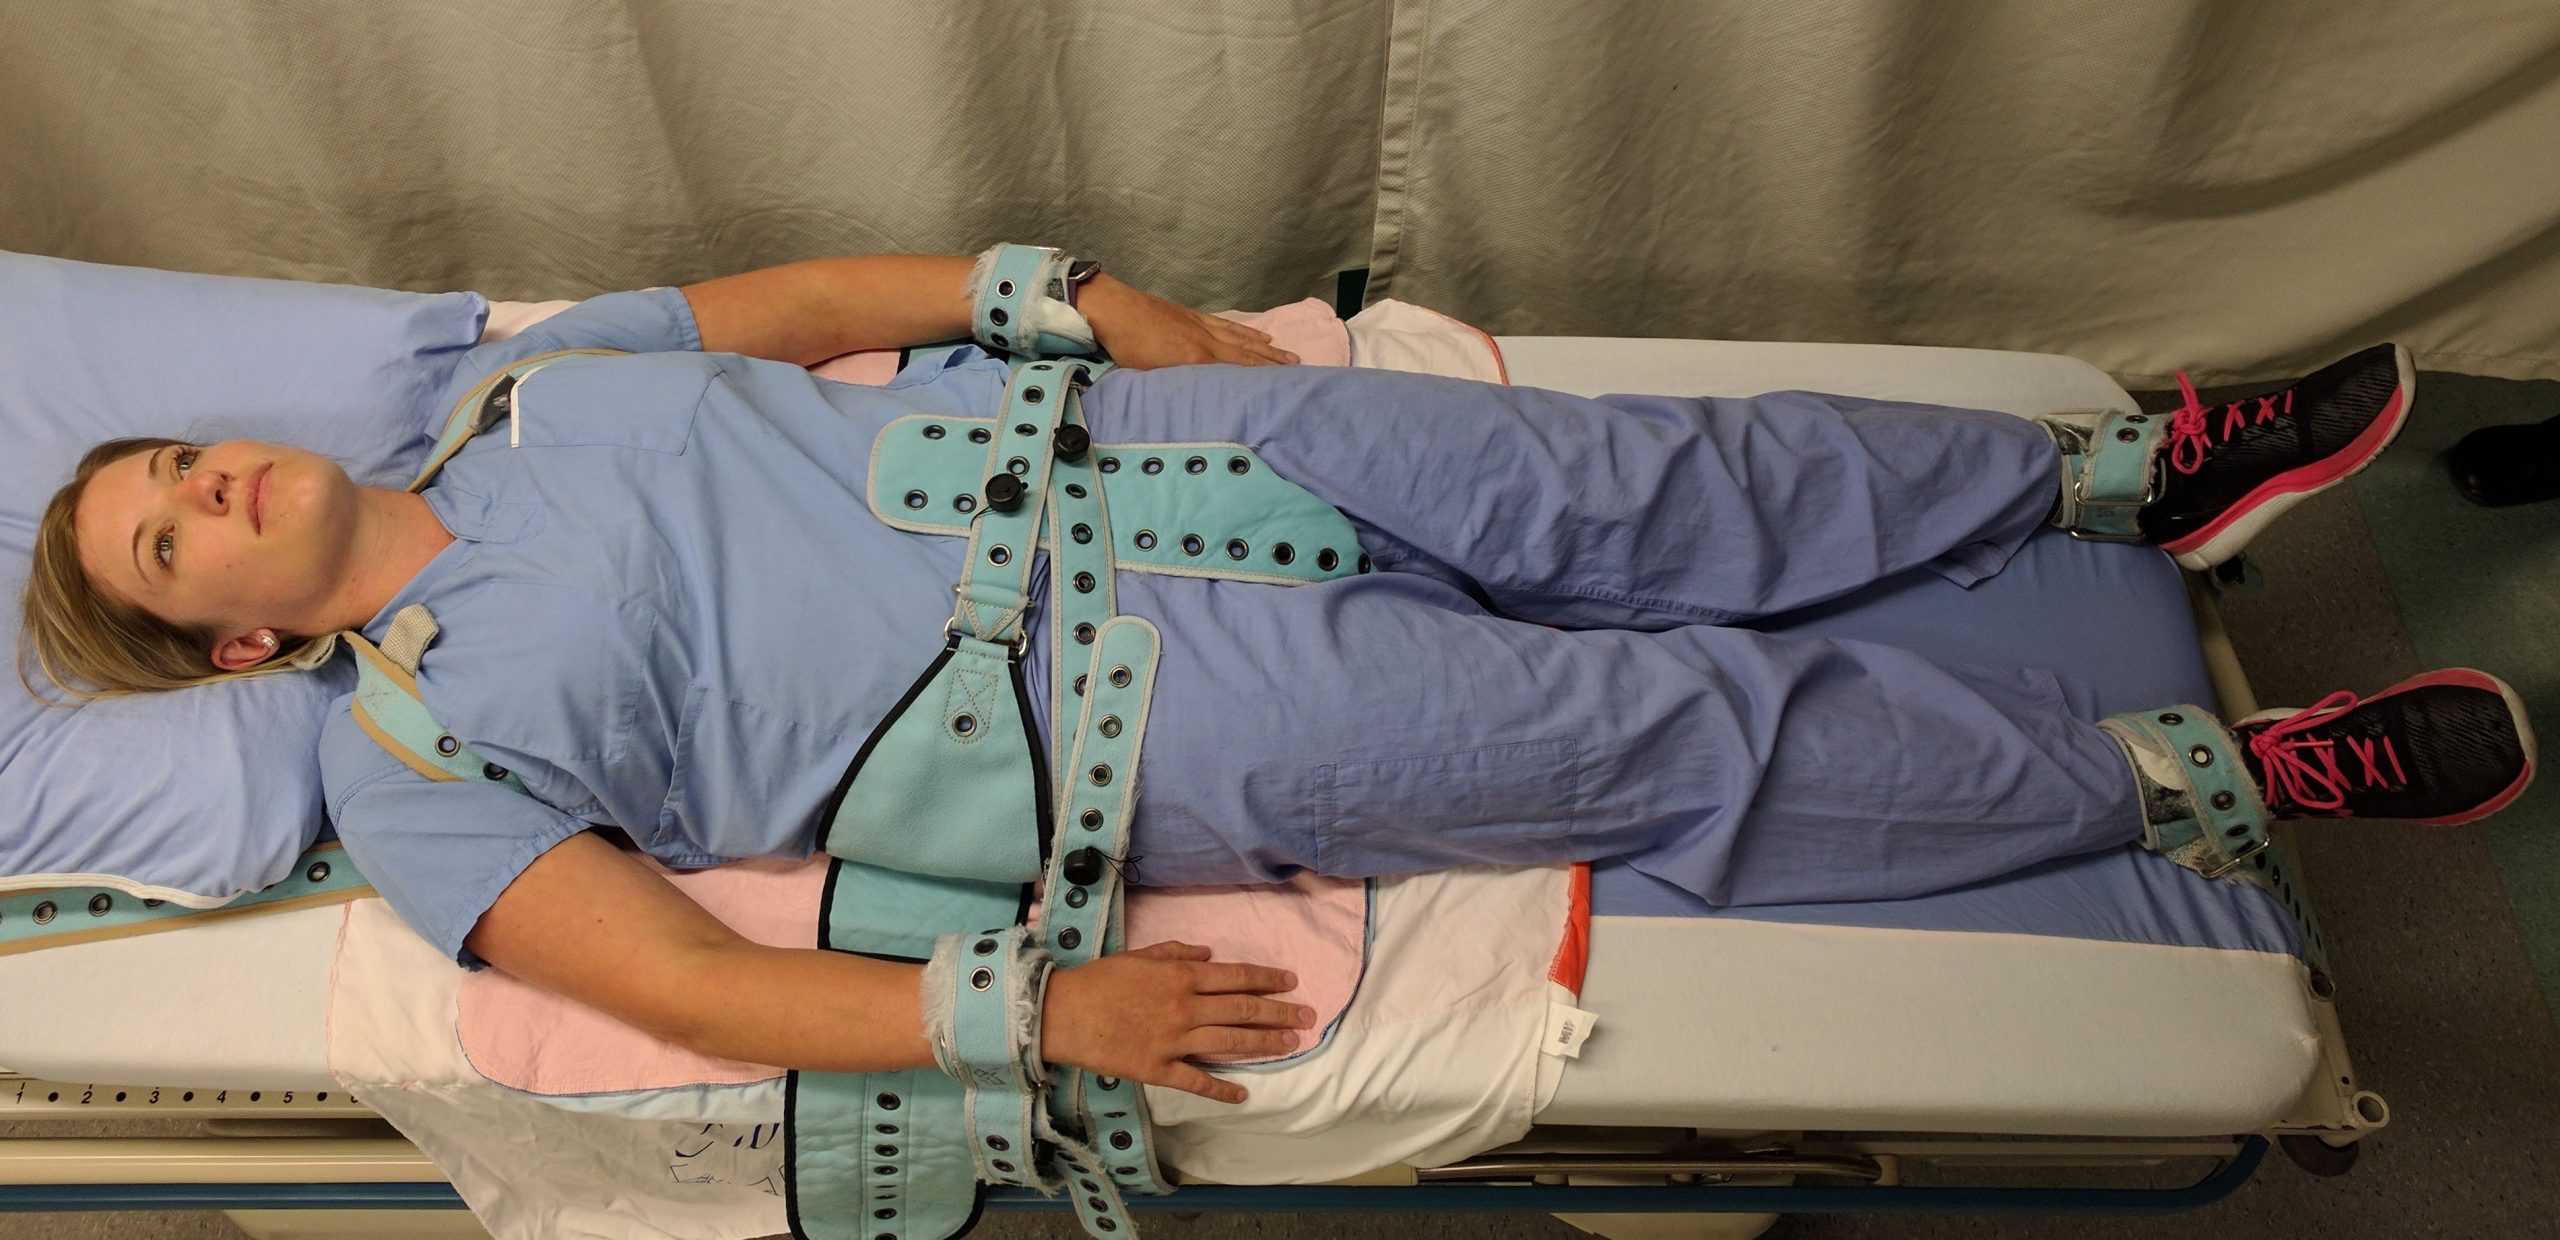 Photo showing a simulated patient in Full Physical Medical Restraints